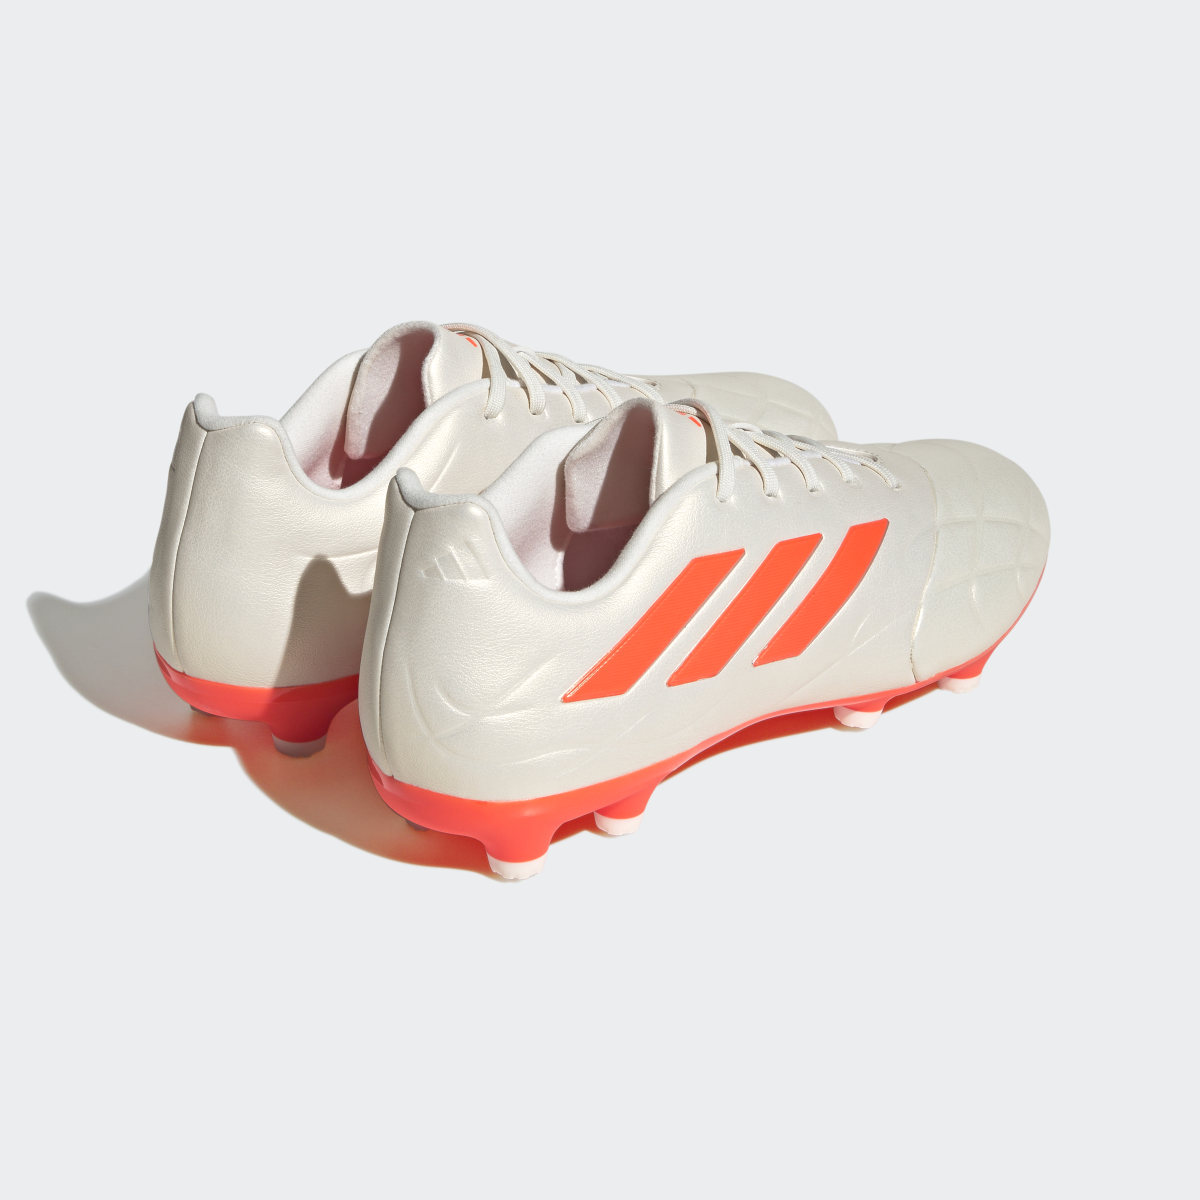 Adidas Copa Pure.3 Firm Ground Soccer Cleats. 6